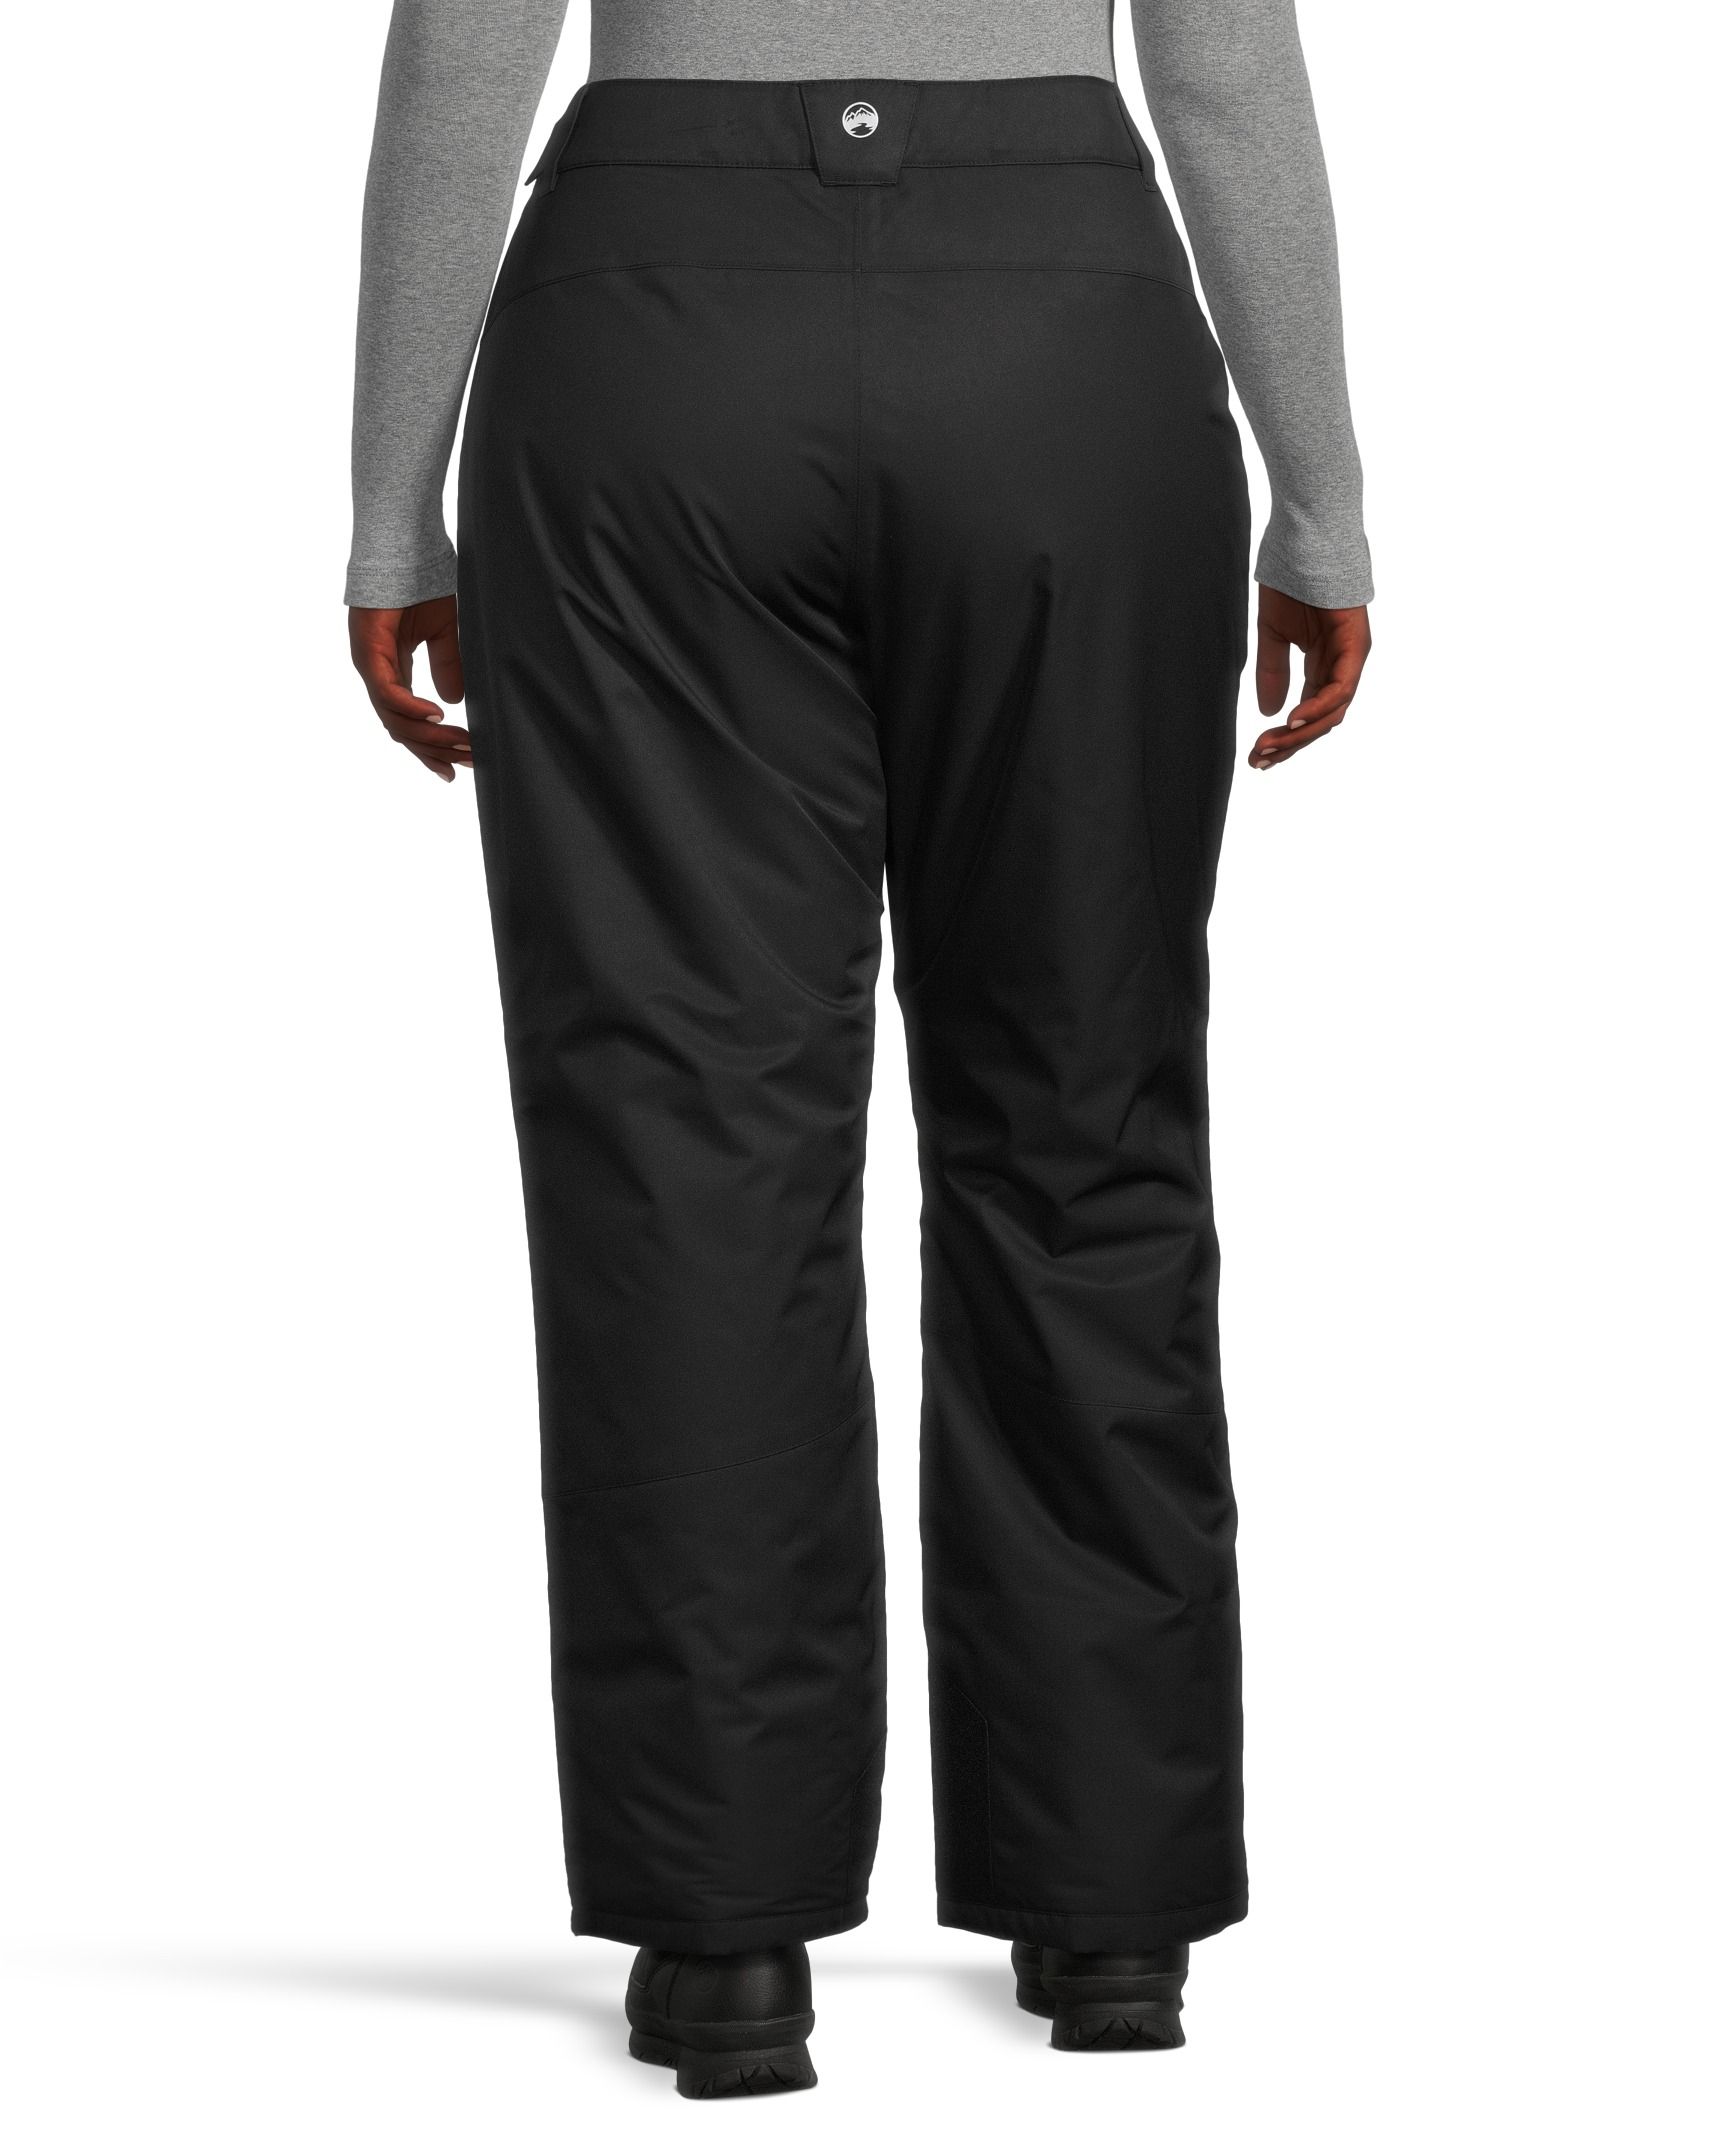 Pulse Women's Trax Insulated Stretch Snow Pant